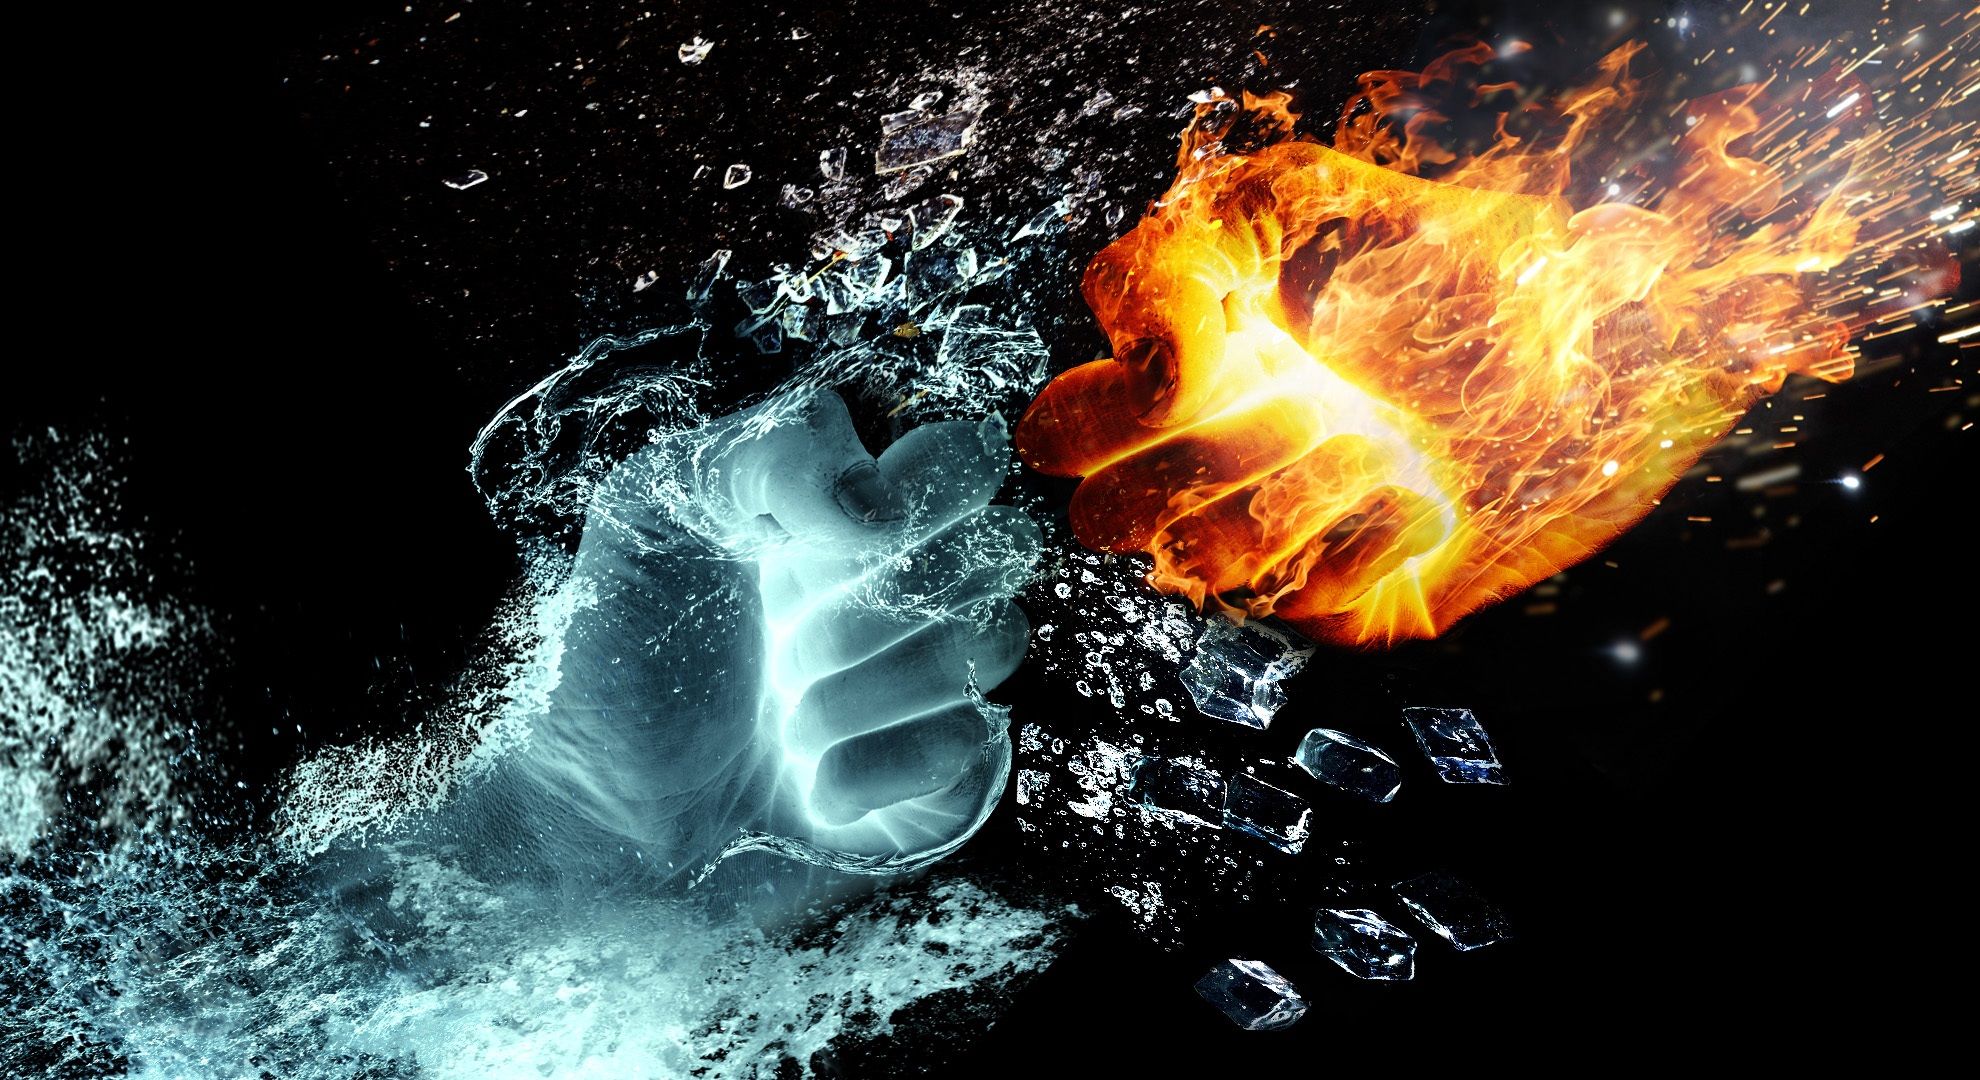 Artistic Fire Hand Ice Punch Wallpaper:1980x1080